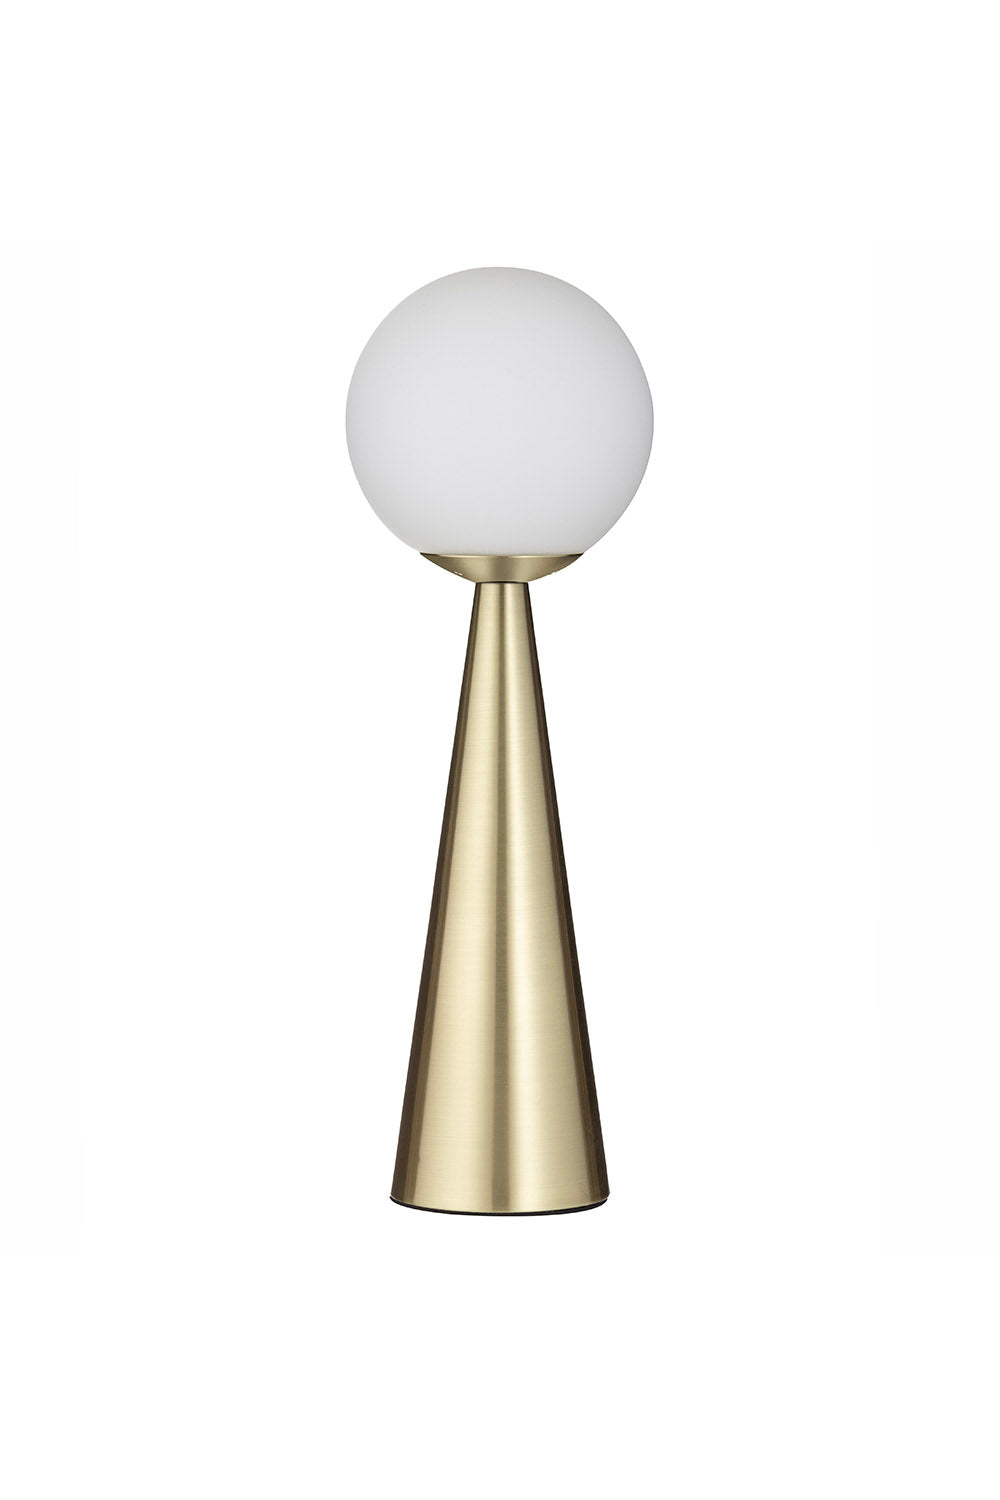 ORION TABLE LAMP GOLD/WHITE